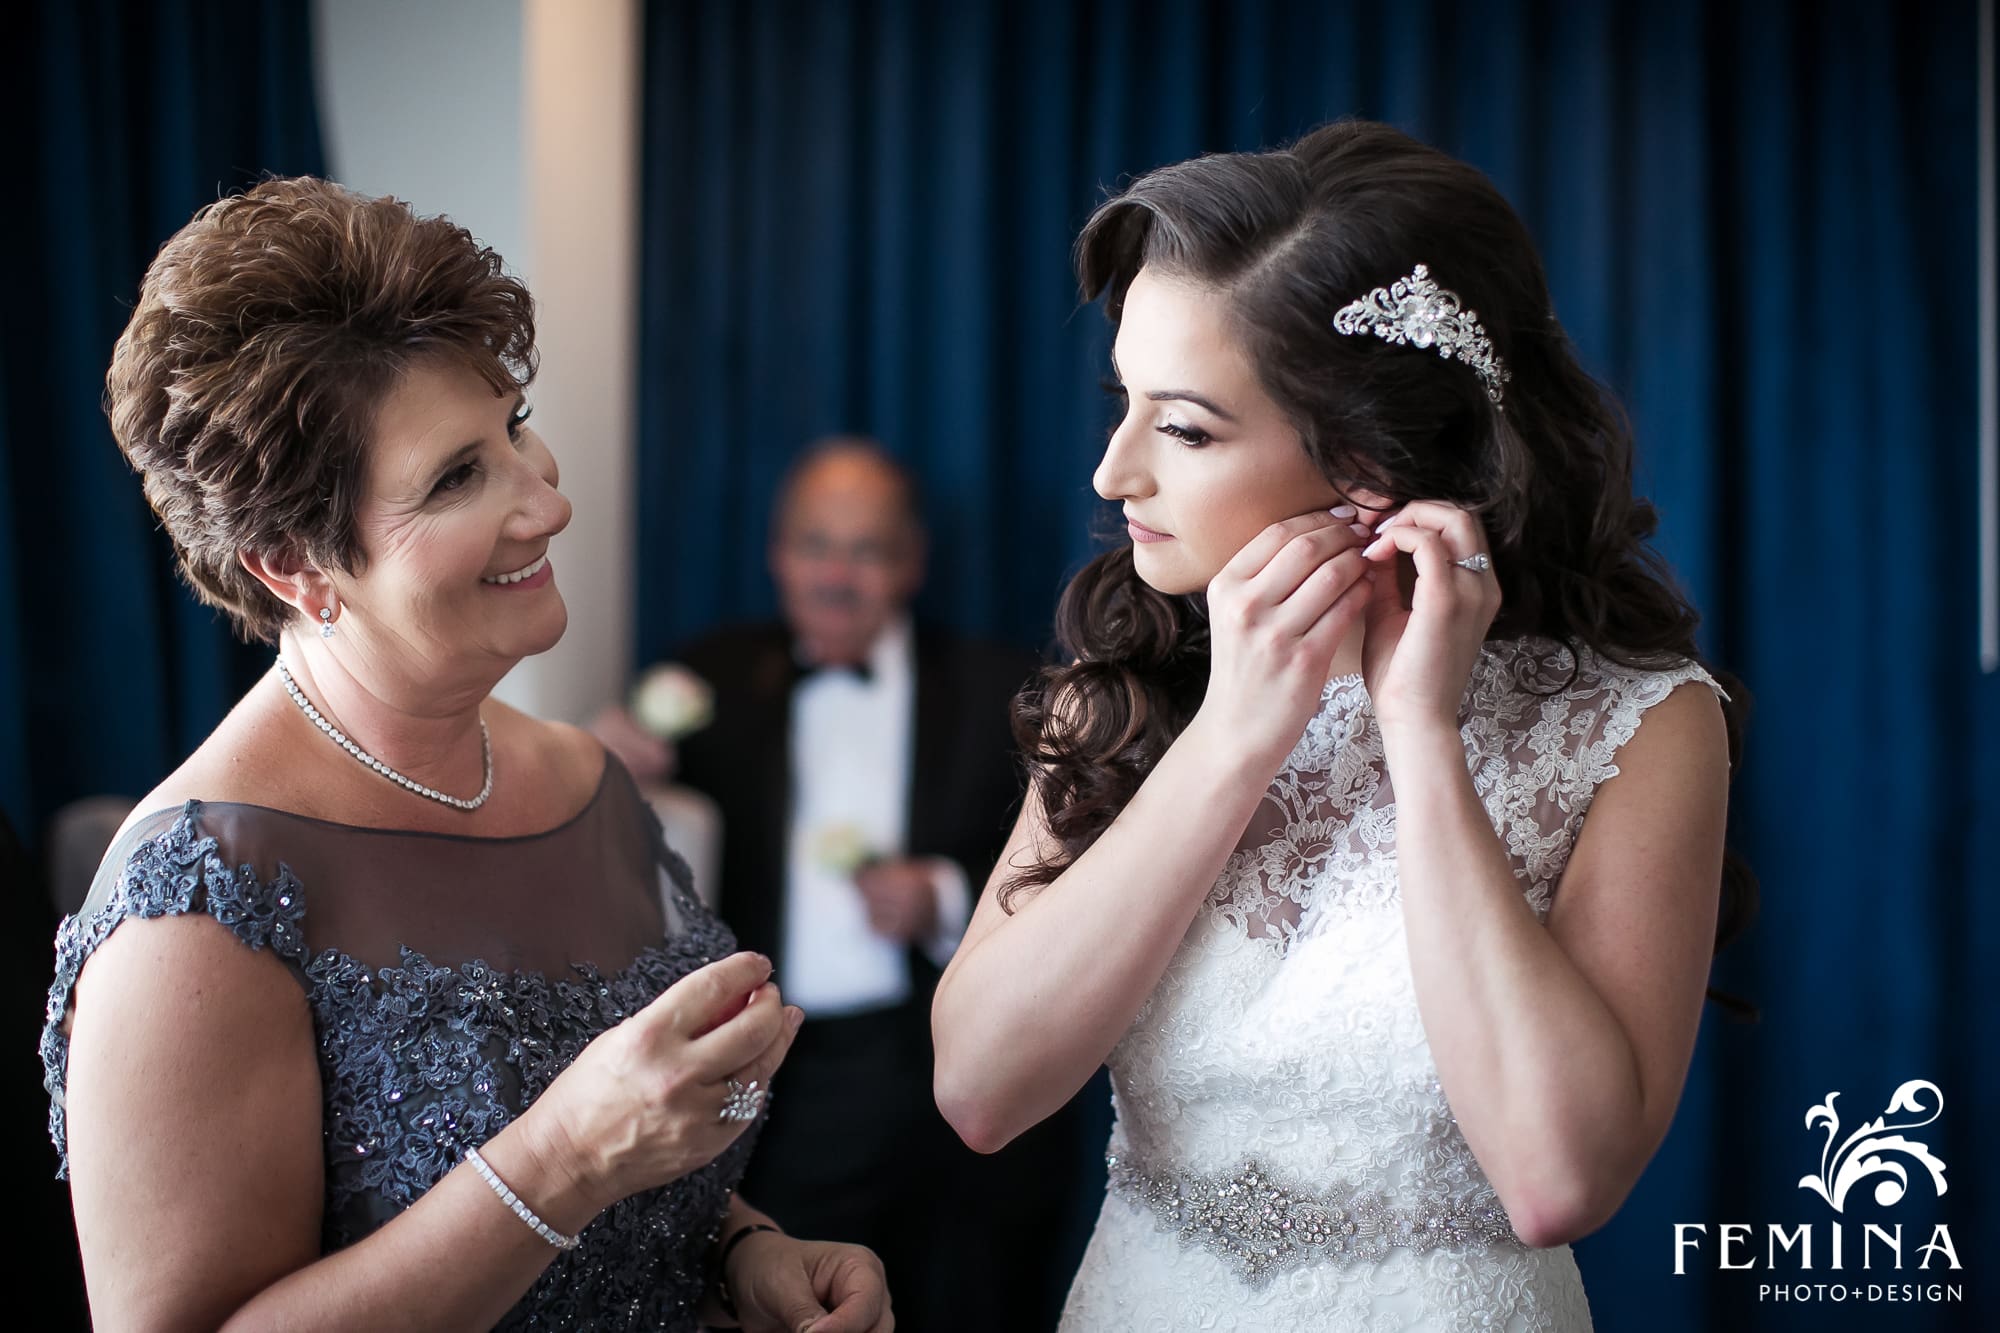 Christina's mom helping her put her earrings on at NYLO hotel in NYC